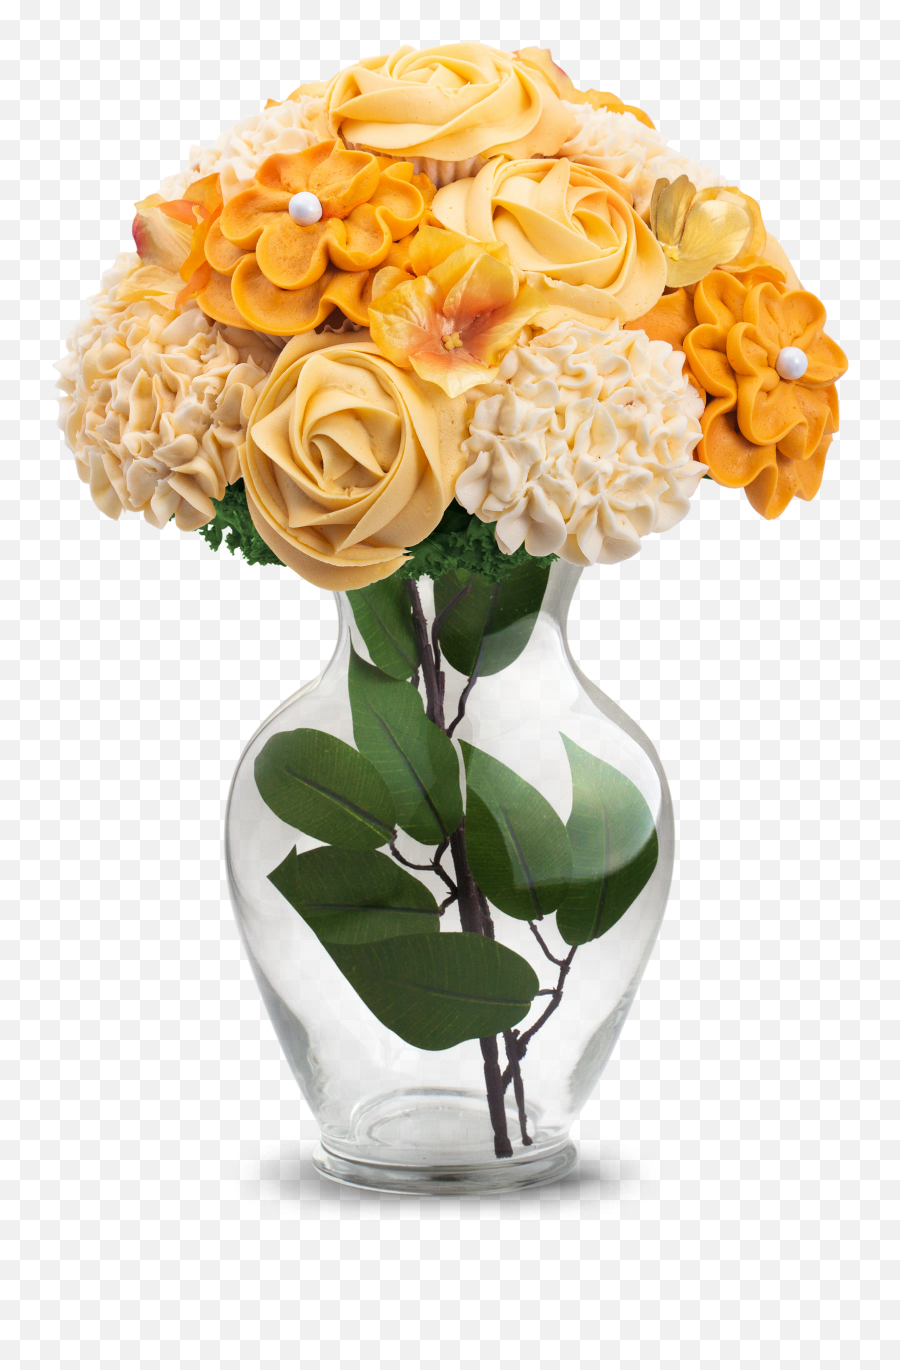 Baked Bouquet - Flower U0026 Cupcake Bouquets For Delivery Cupcake Bouquet Long Stem Png,Bunch Of Flowers Png